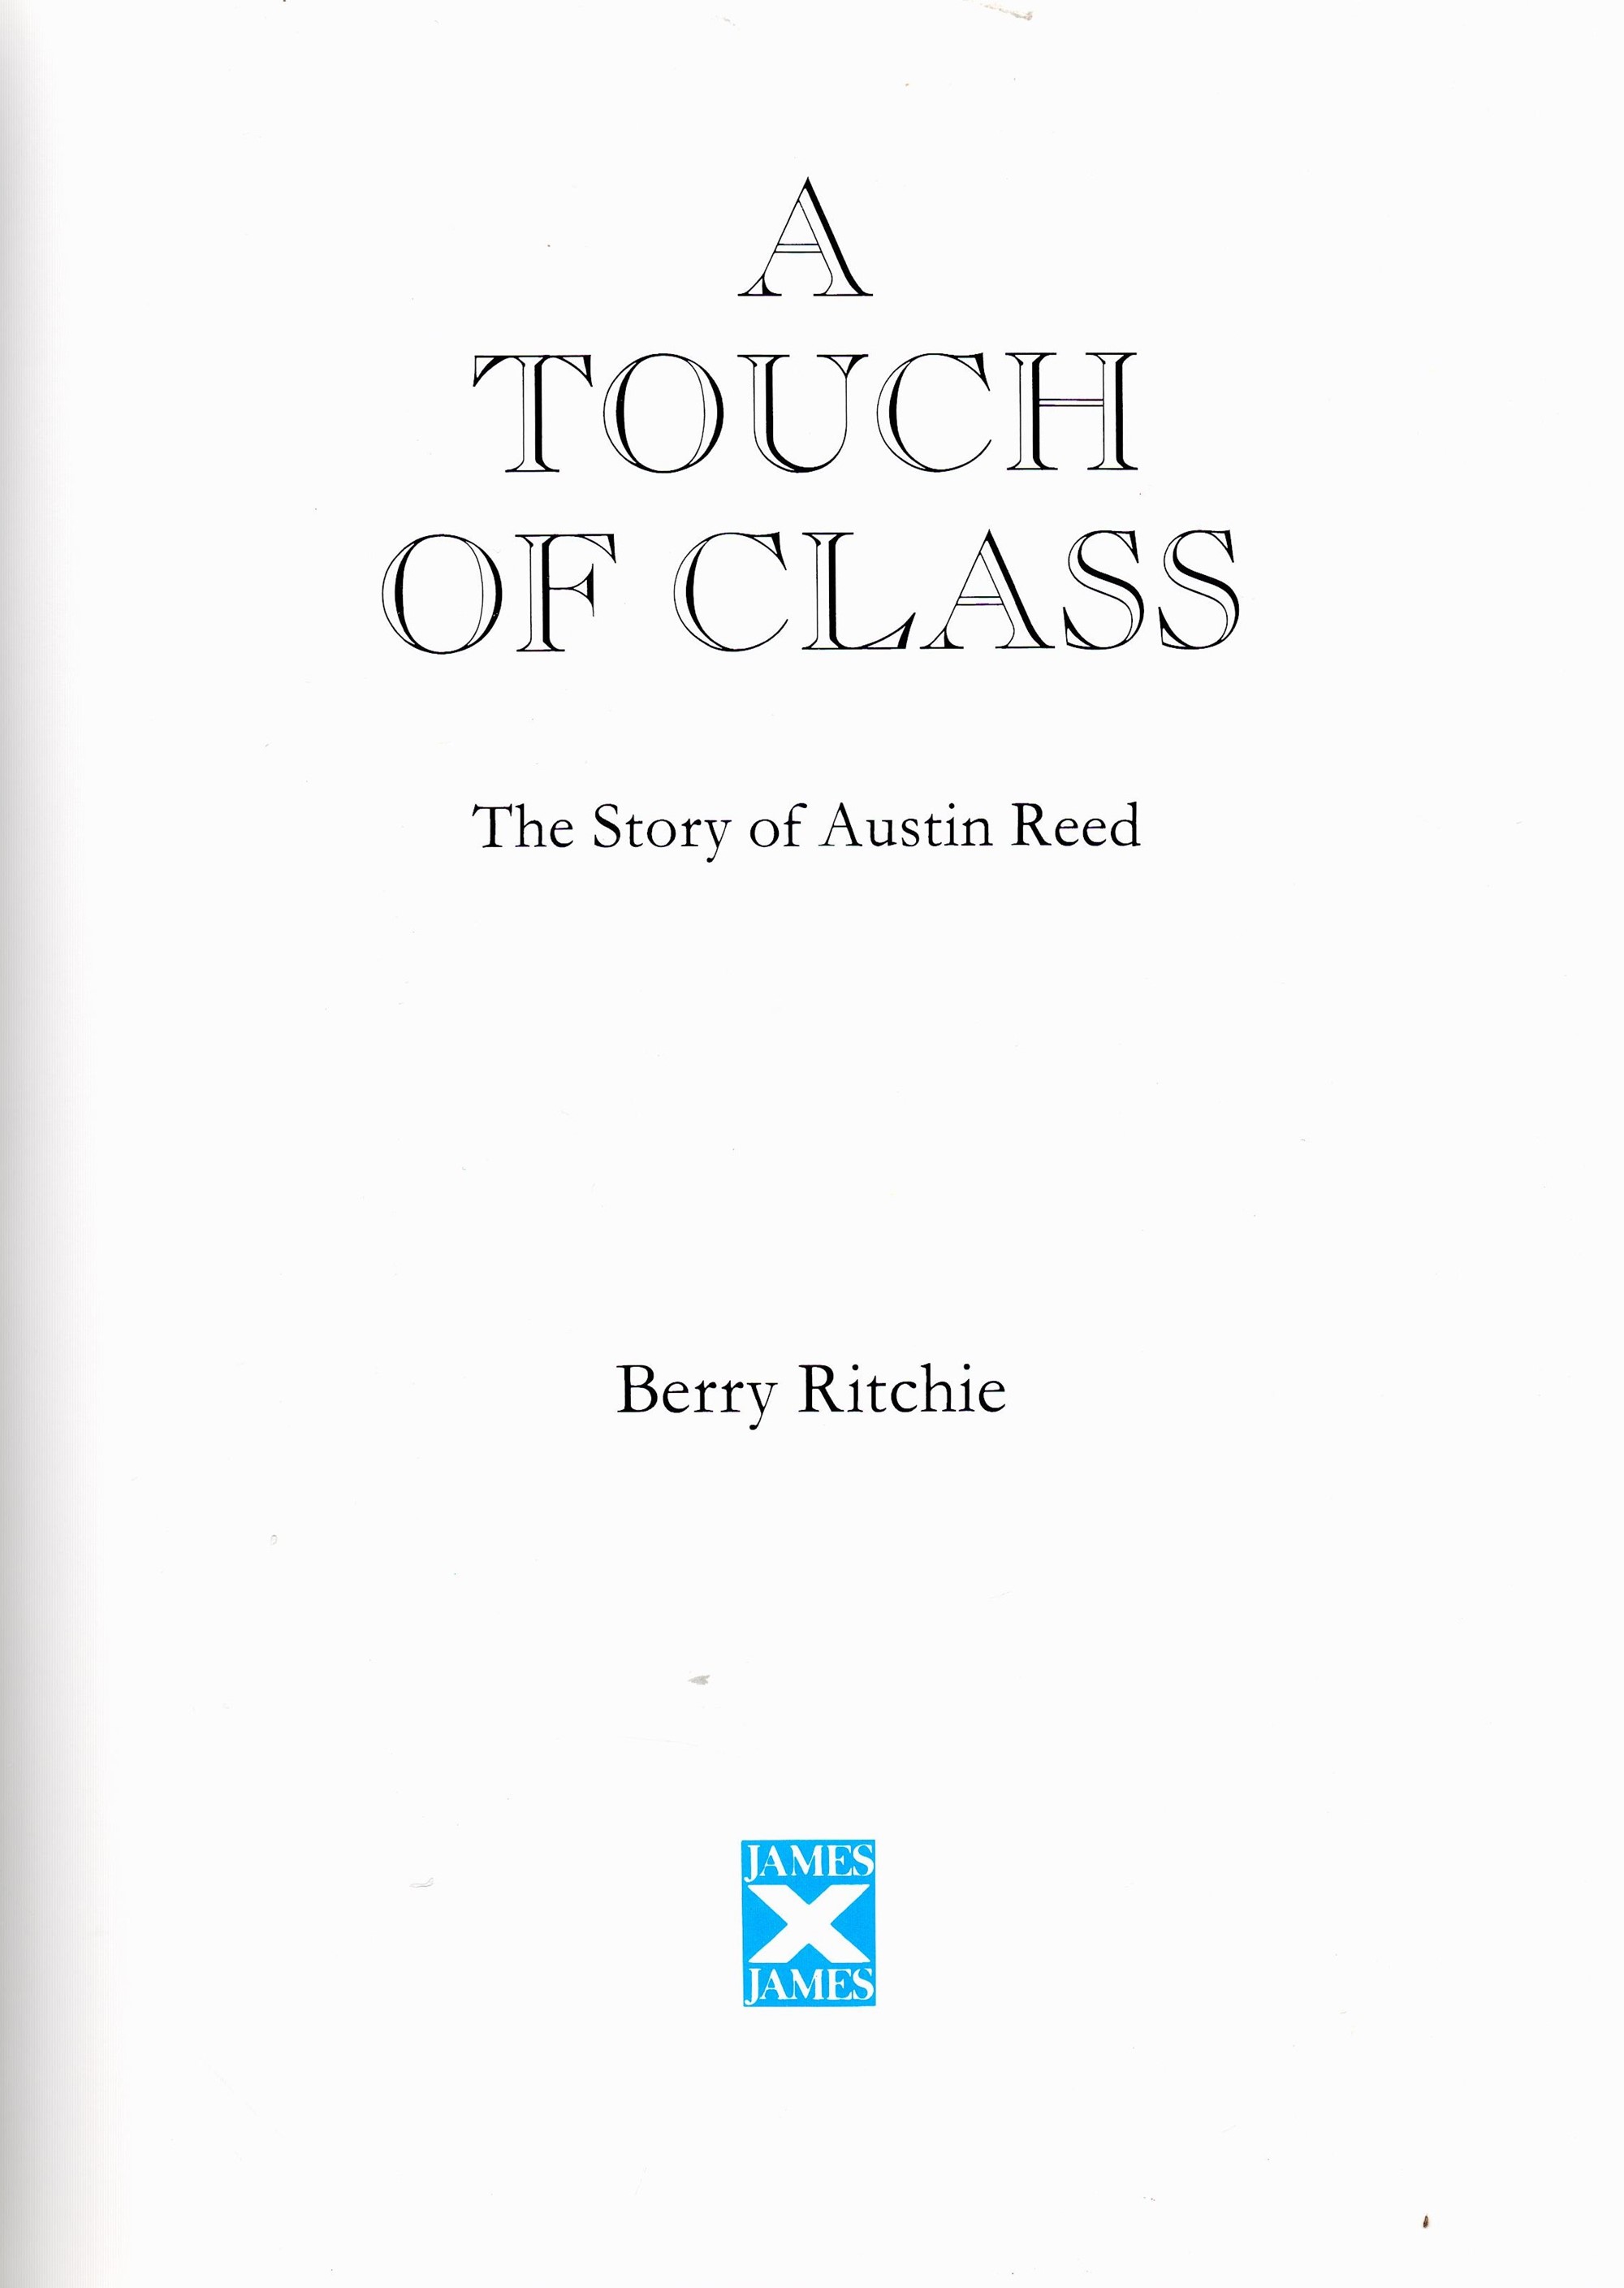 A Touch of Class Austin Reeds of Regent Street by Berry Ritchie Hardback Book 1990 First Edition - Image 3 of 6